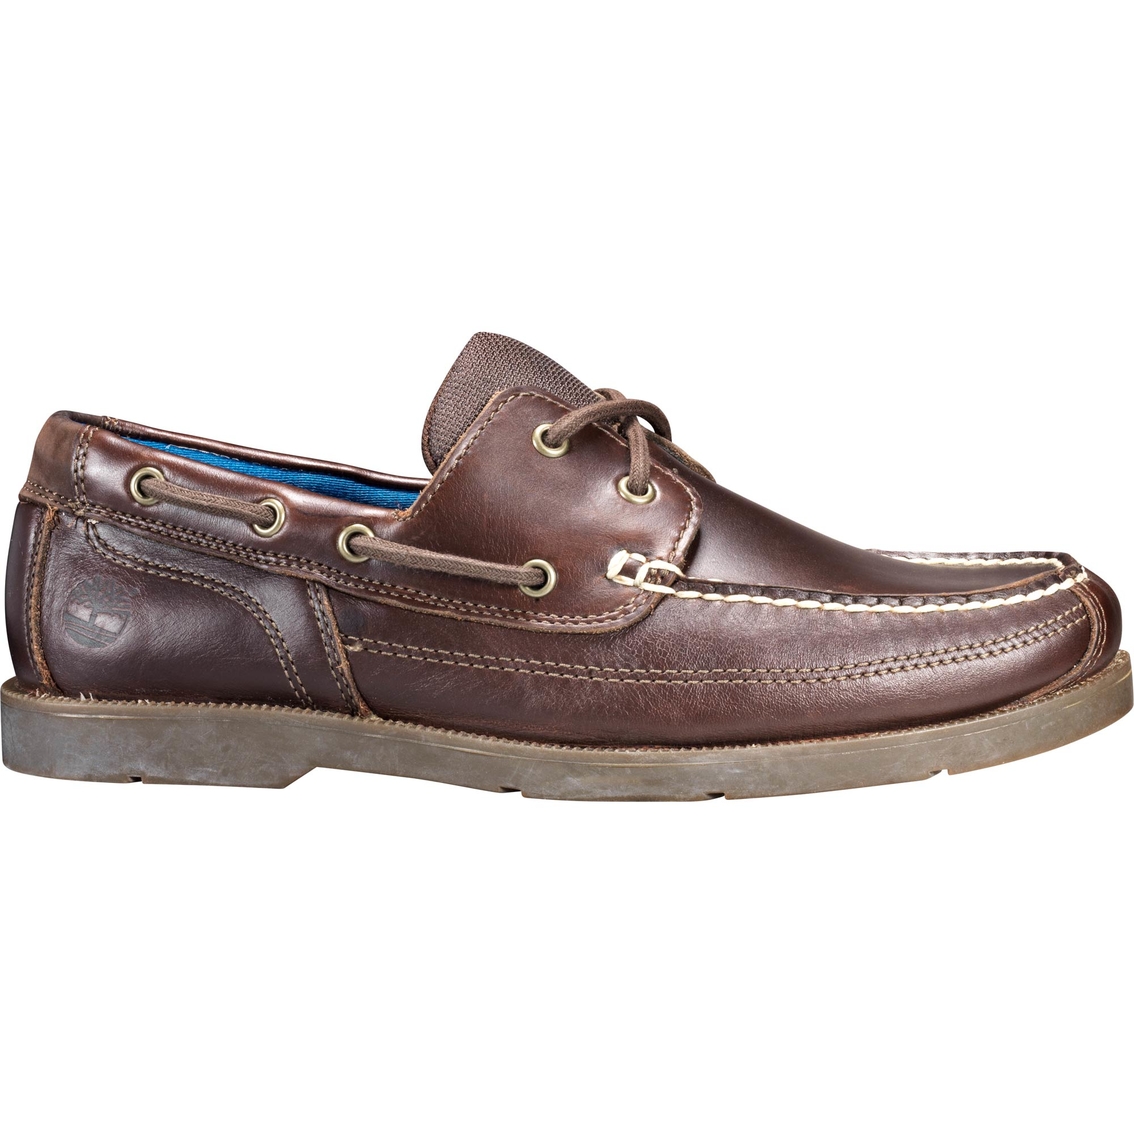 timberland men's piper cove boat shoes